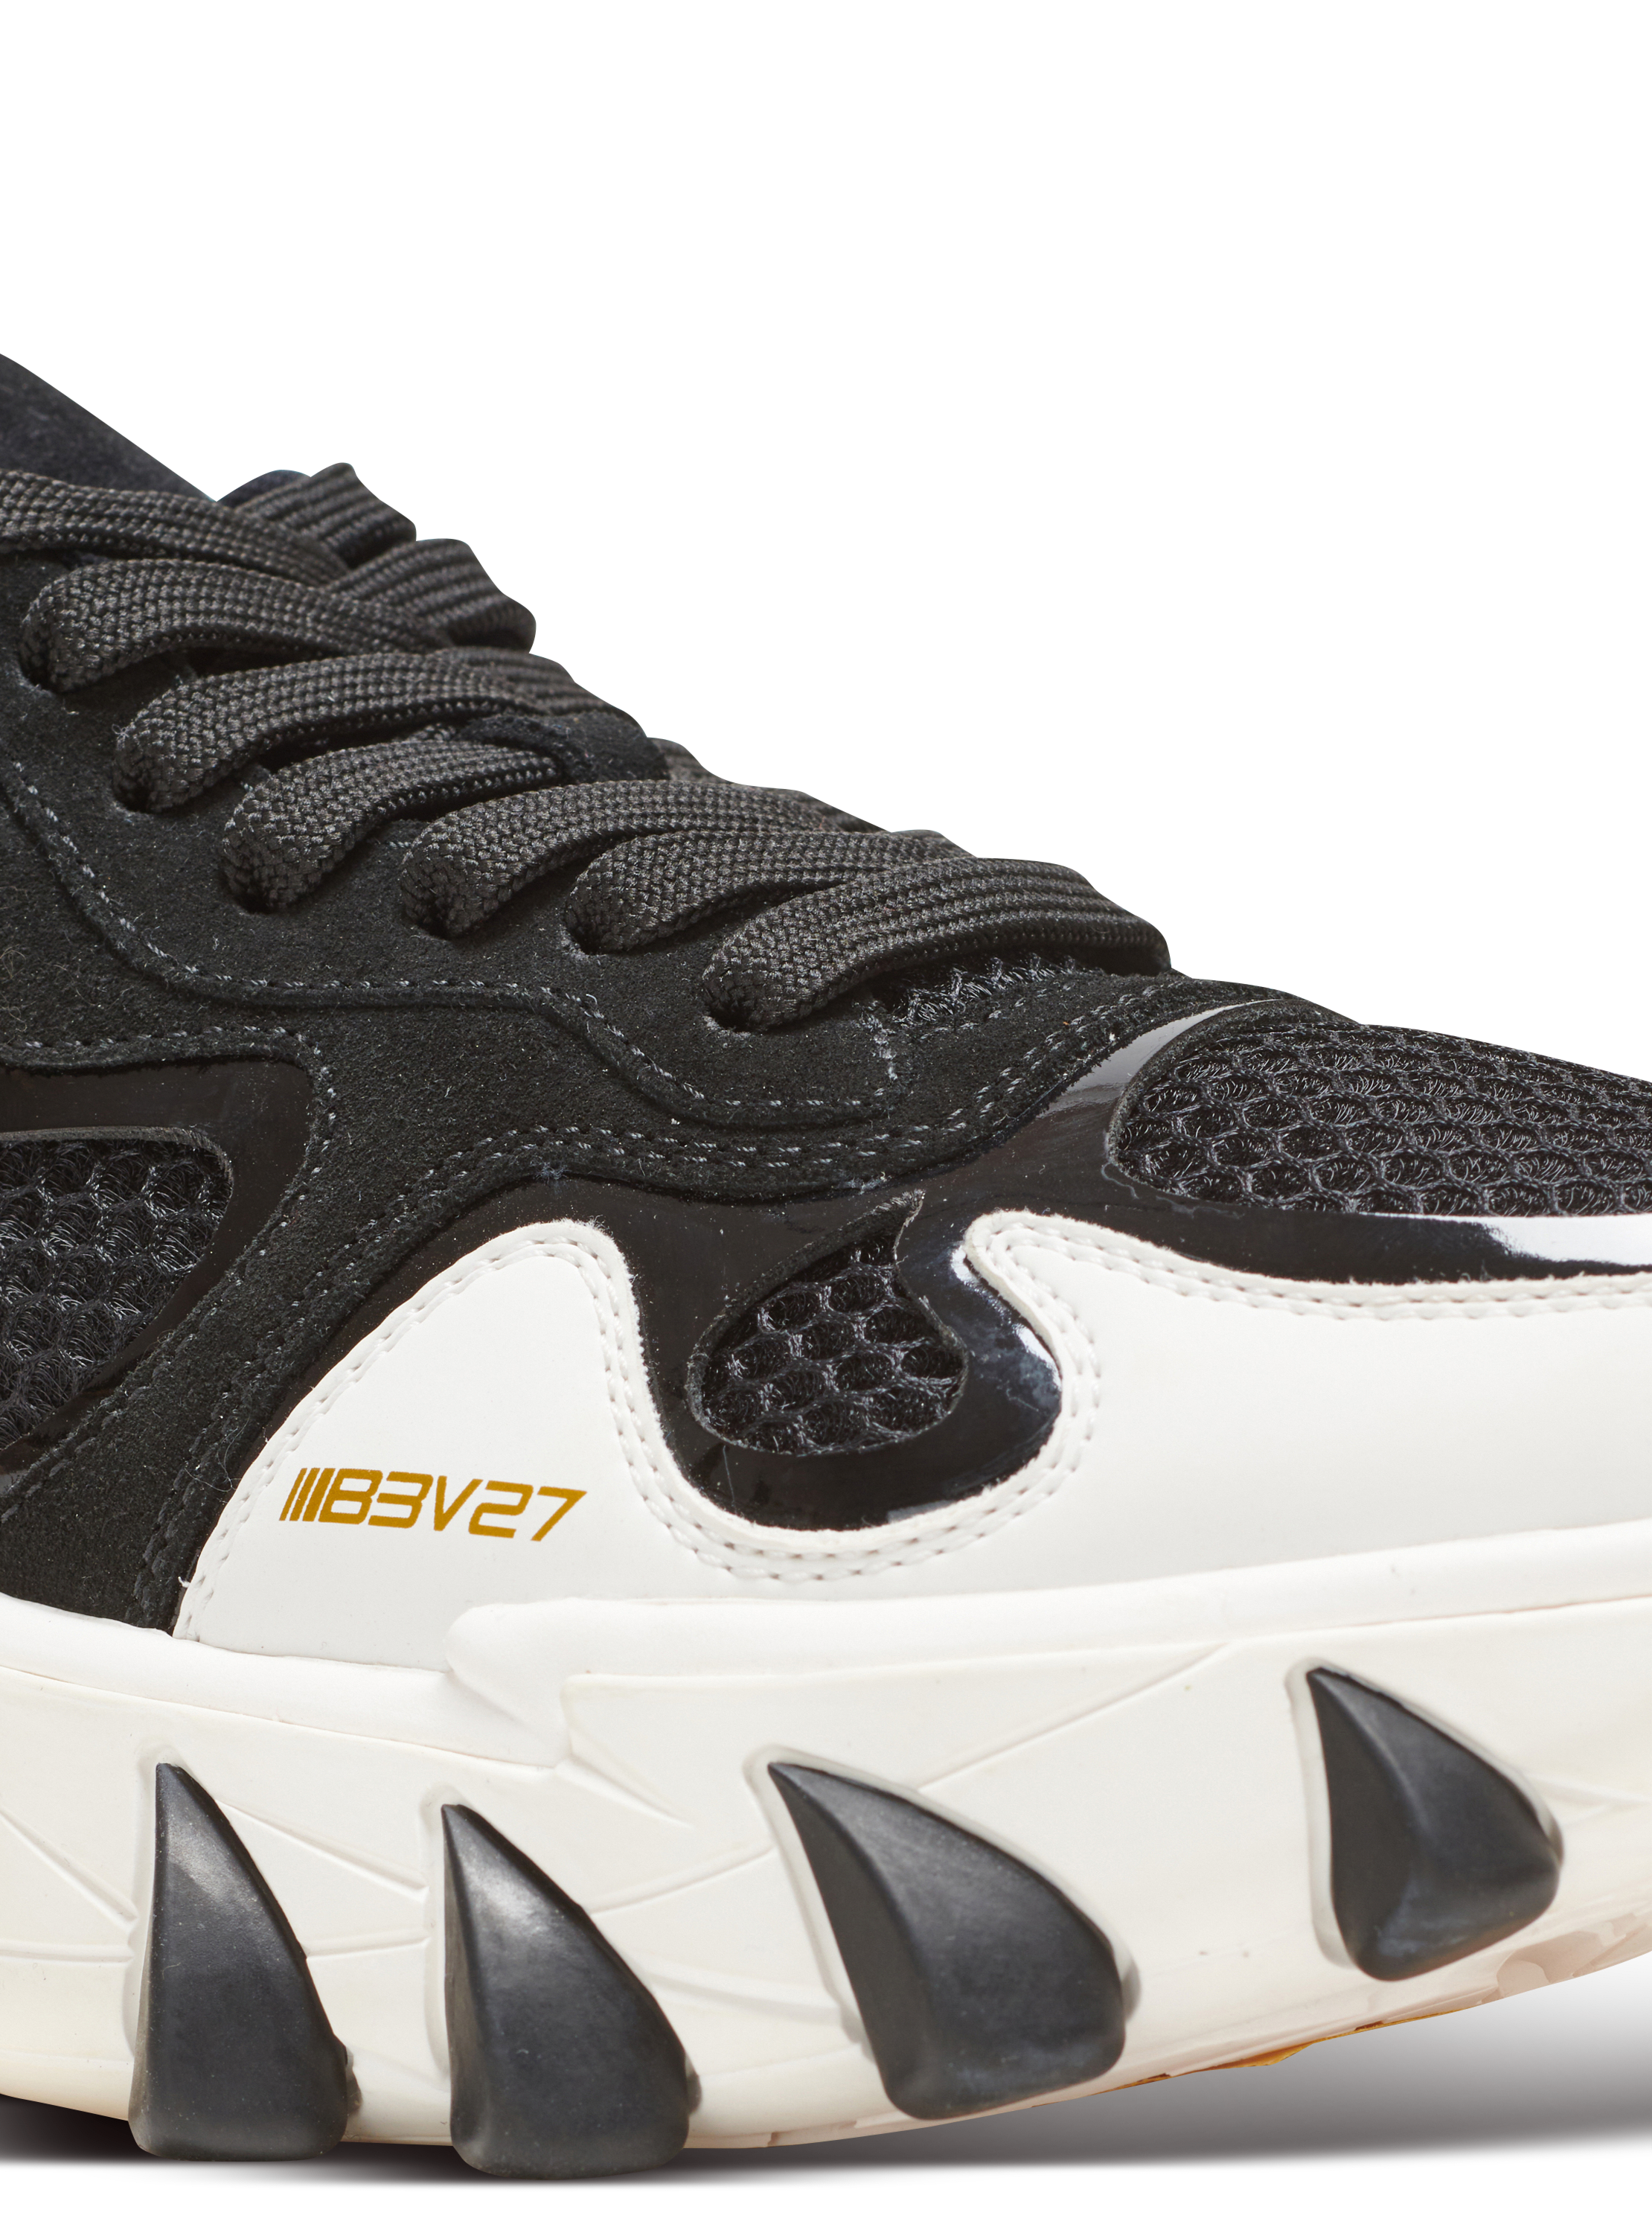 B-East trainer in leather, suede and mesh black - Women